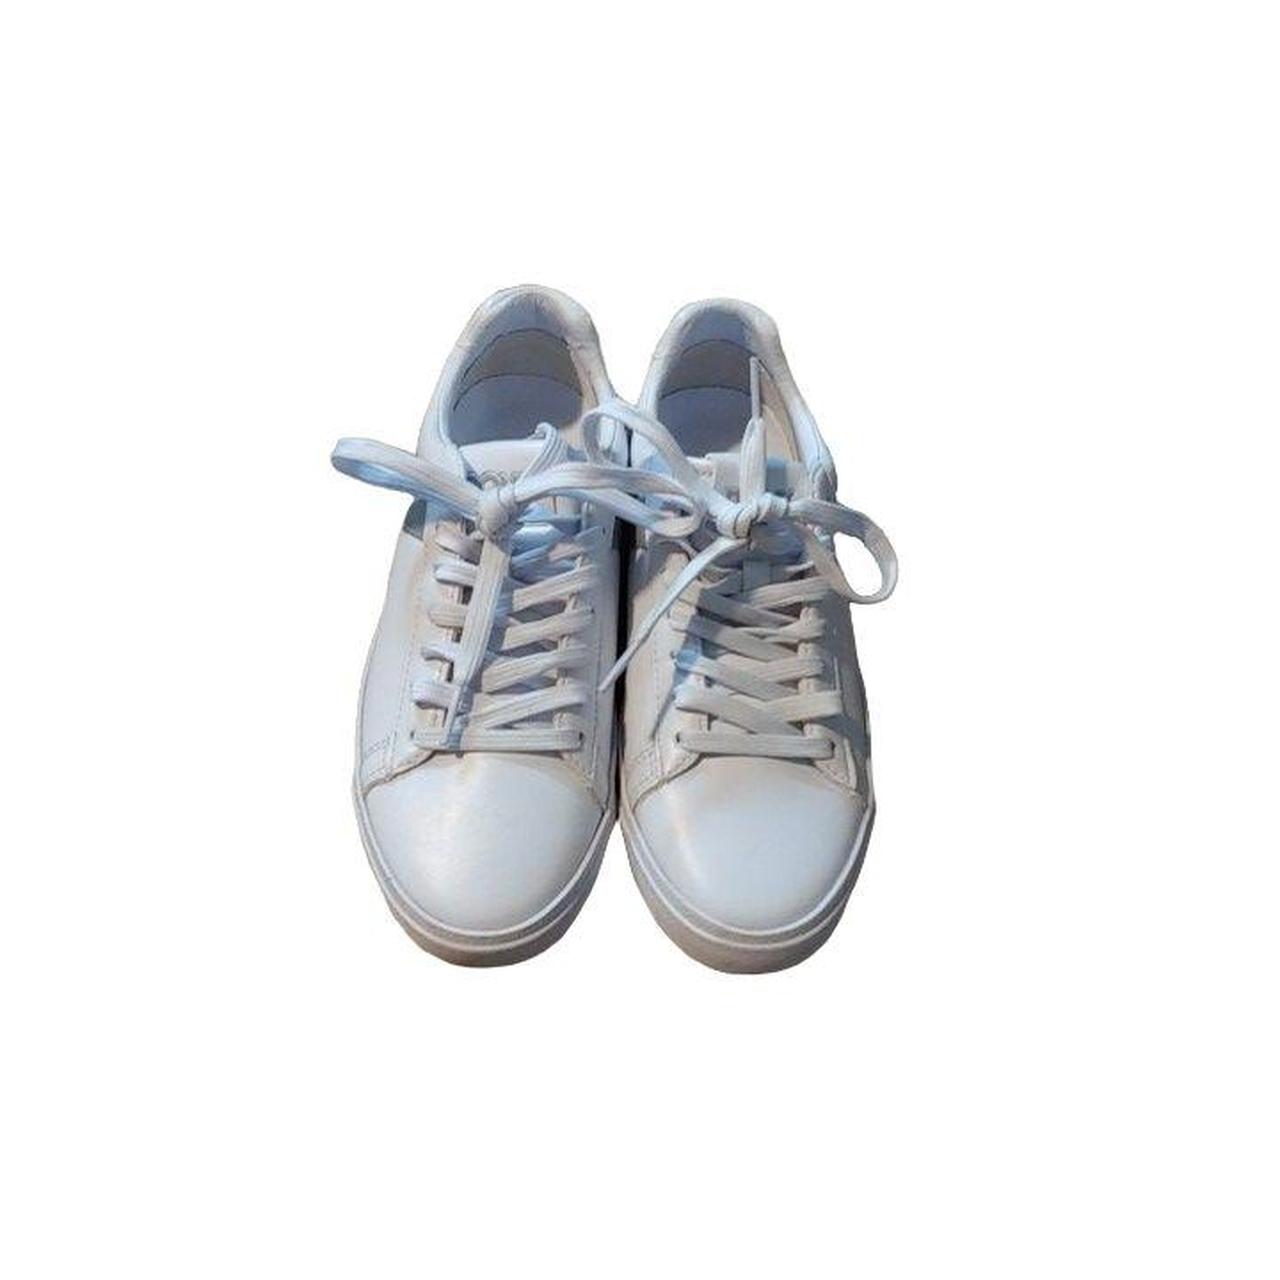 Product Image 1 - PONY sneakers size 6
Smoke free